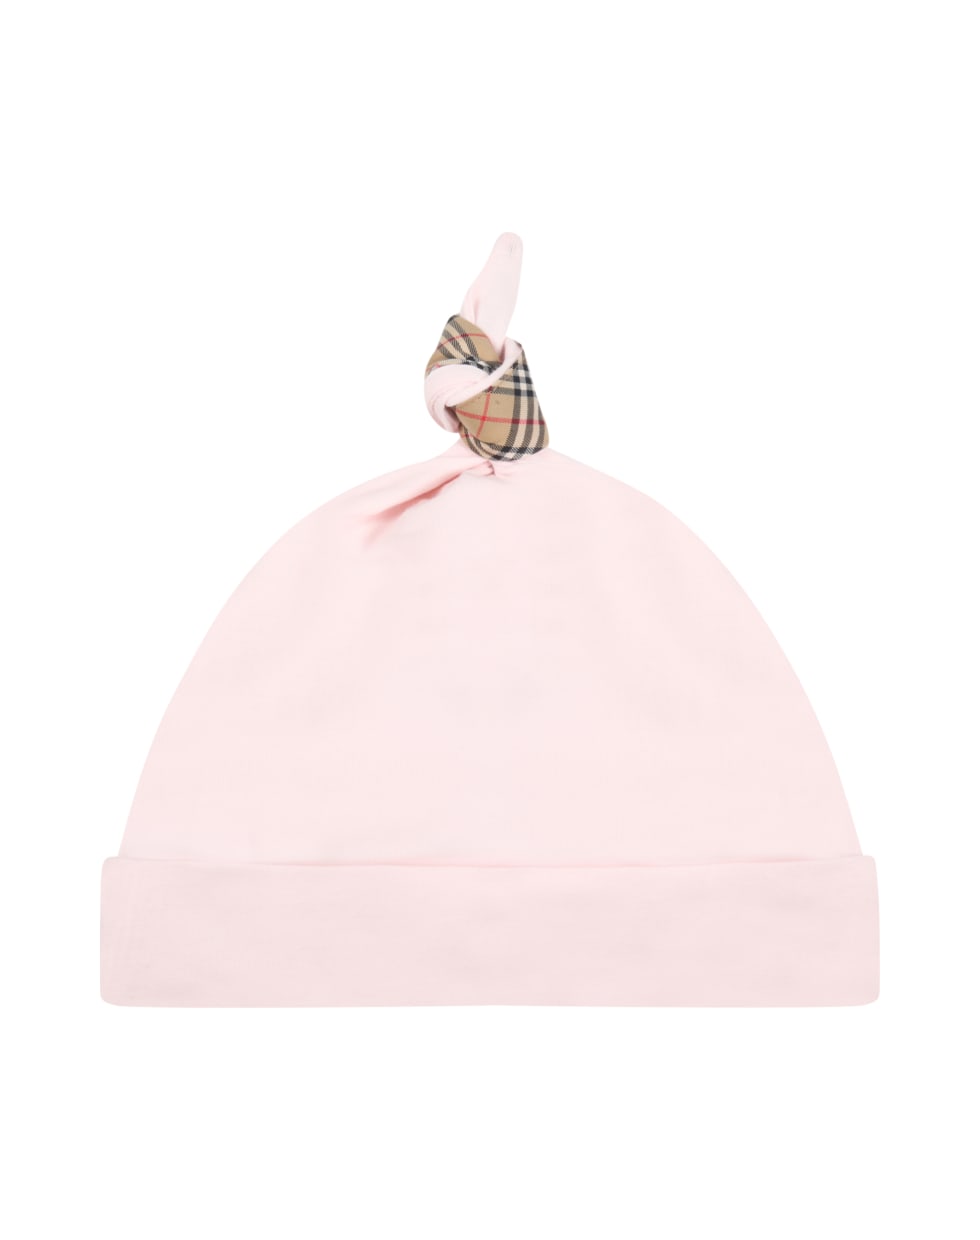 Burberry Pink Set For Baby Girl With Iconic Check Vintage - Pink